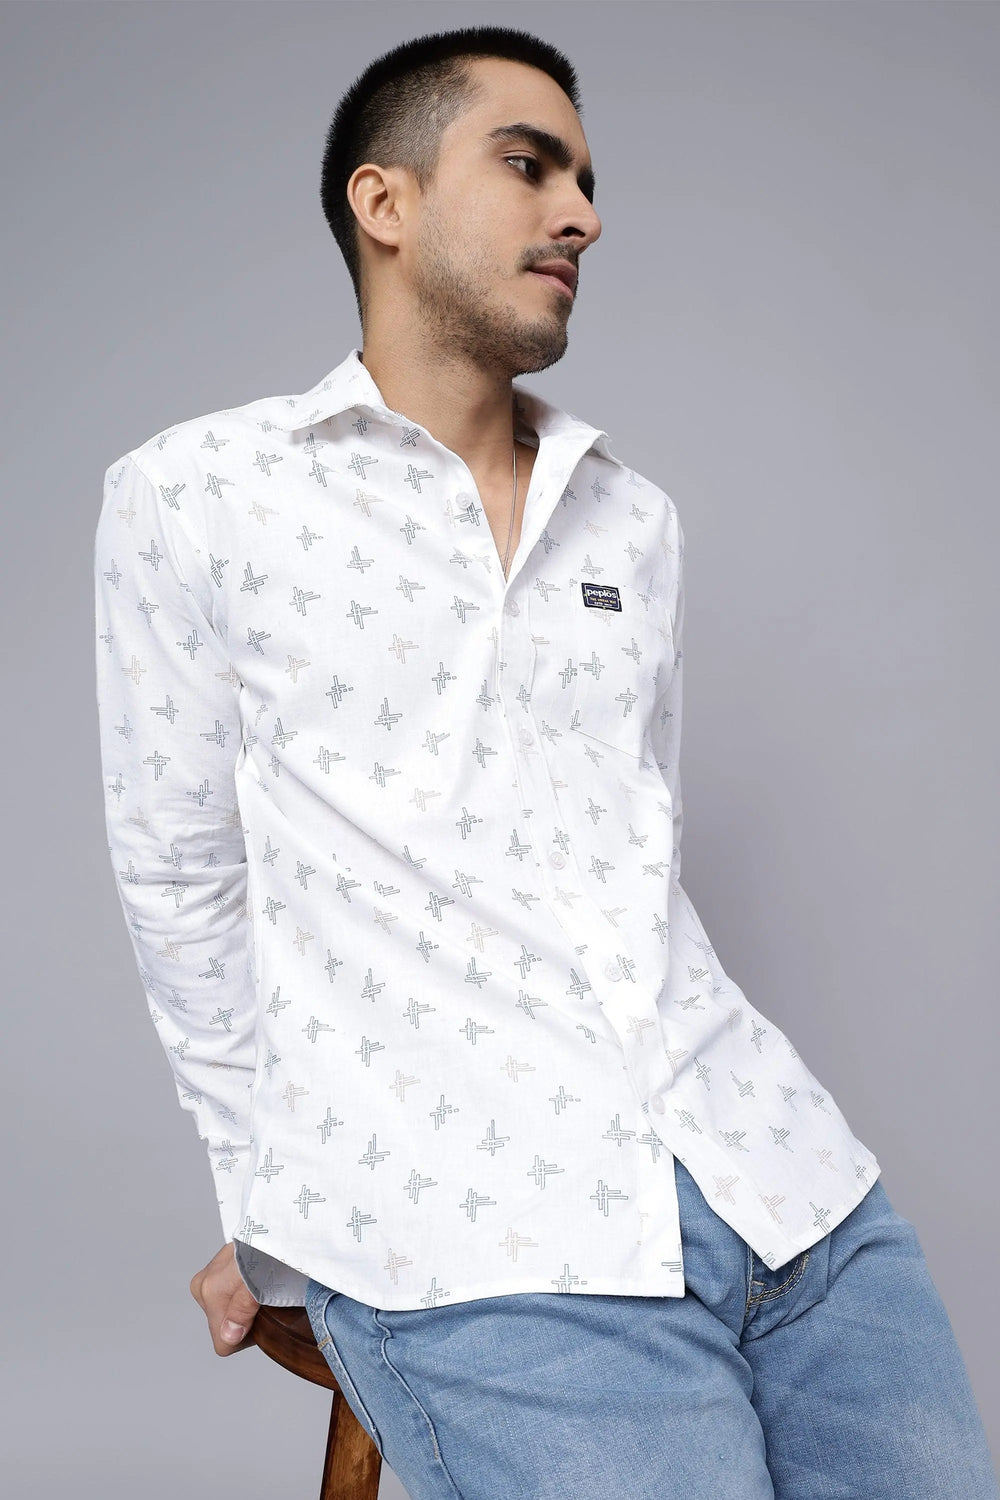 Regular Fit Pure Cotton White Printed Casual Shirt For Men - Peplos Jeans 